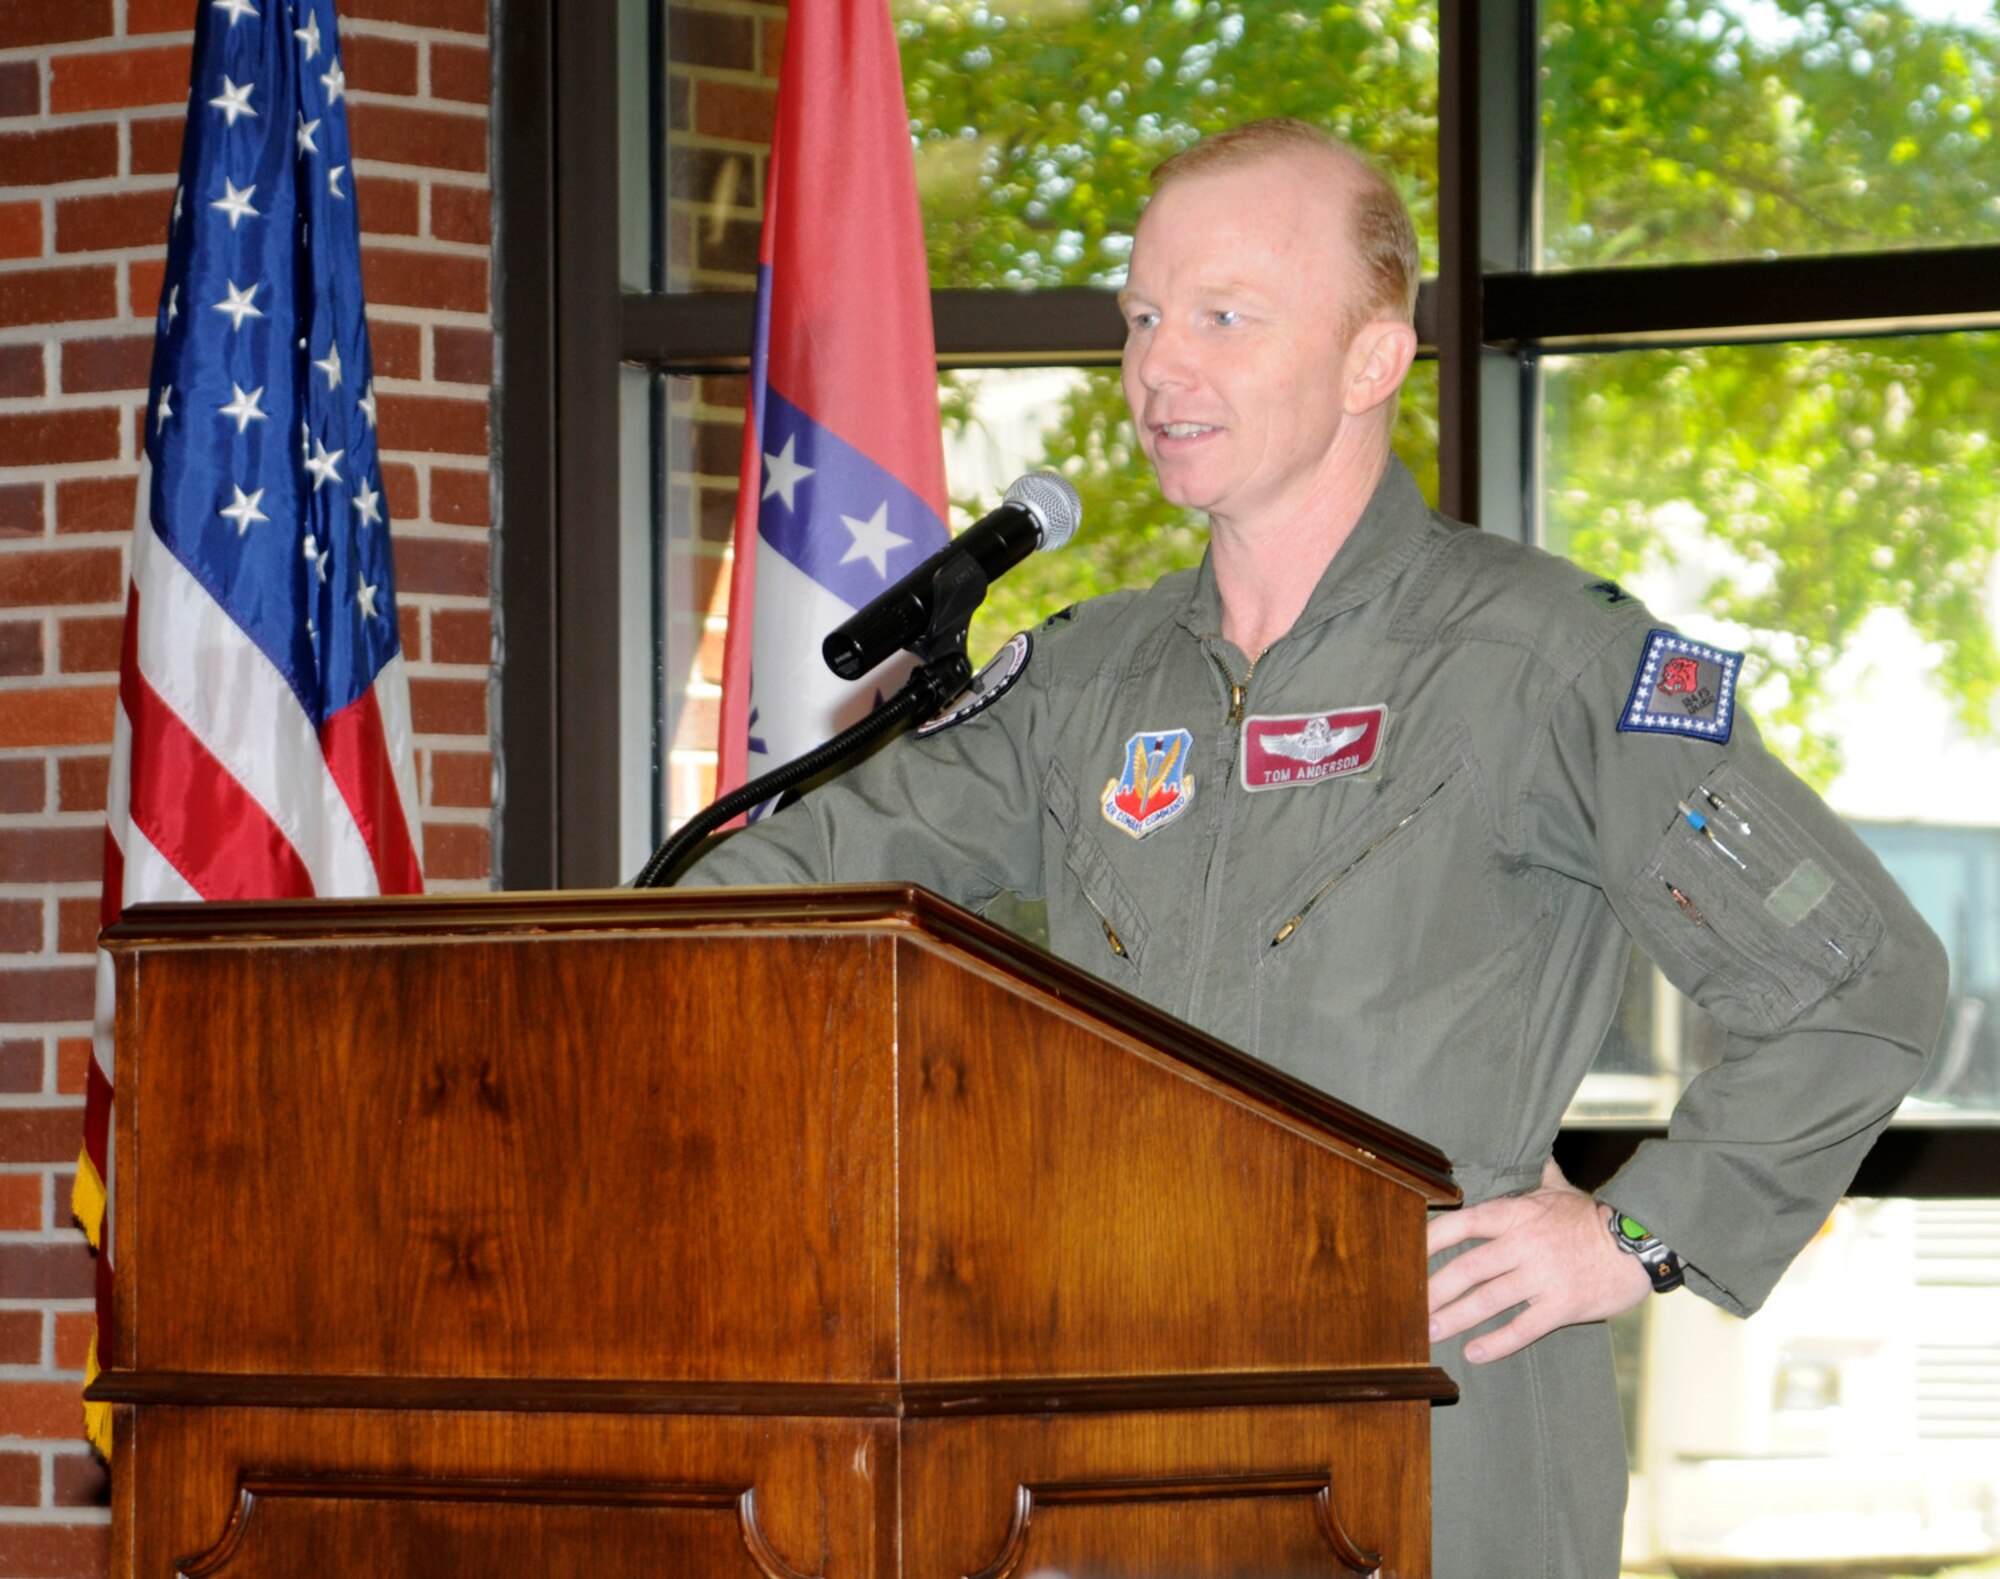 Col. Tom Anderson, 188th Fighter Wing commander, speaks to a group of retirees at the Arkansas National Guard Senior Leaders Conference held in Fort Smith, Ark., at Fort Chaffee Maneuver Training Center, the 188th Fighter Wing, and Armed Forces Reserve Center May 6, 2010. (Photo by Capt. Heath Allen/Arkansas National Guard Public Affairs)